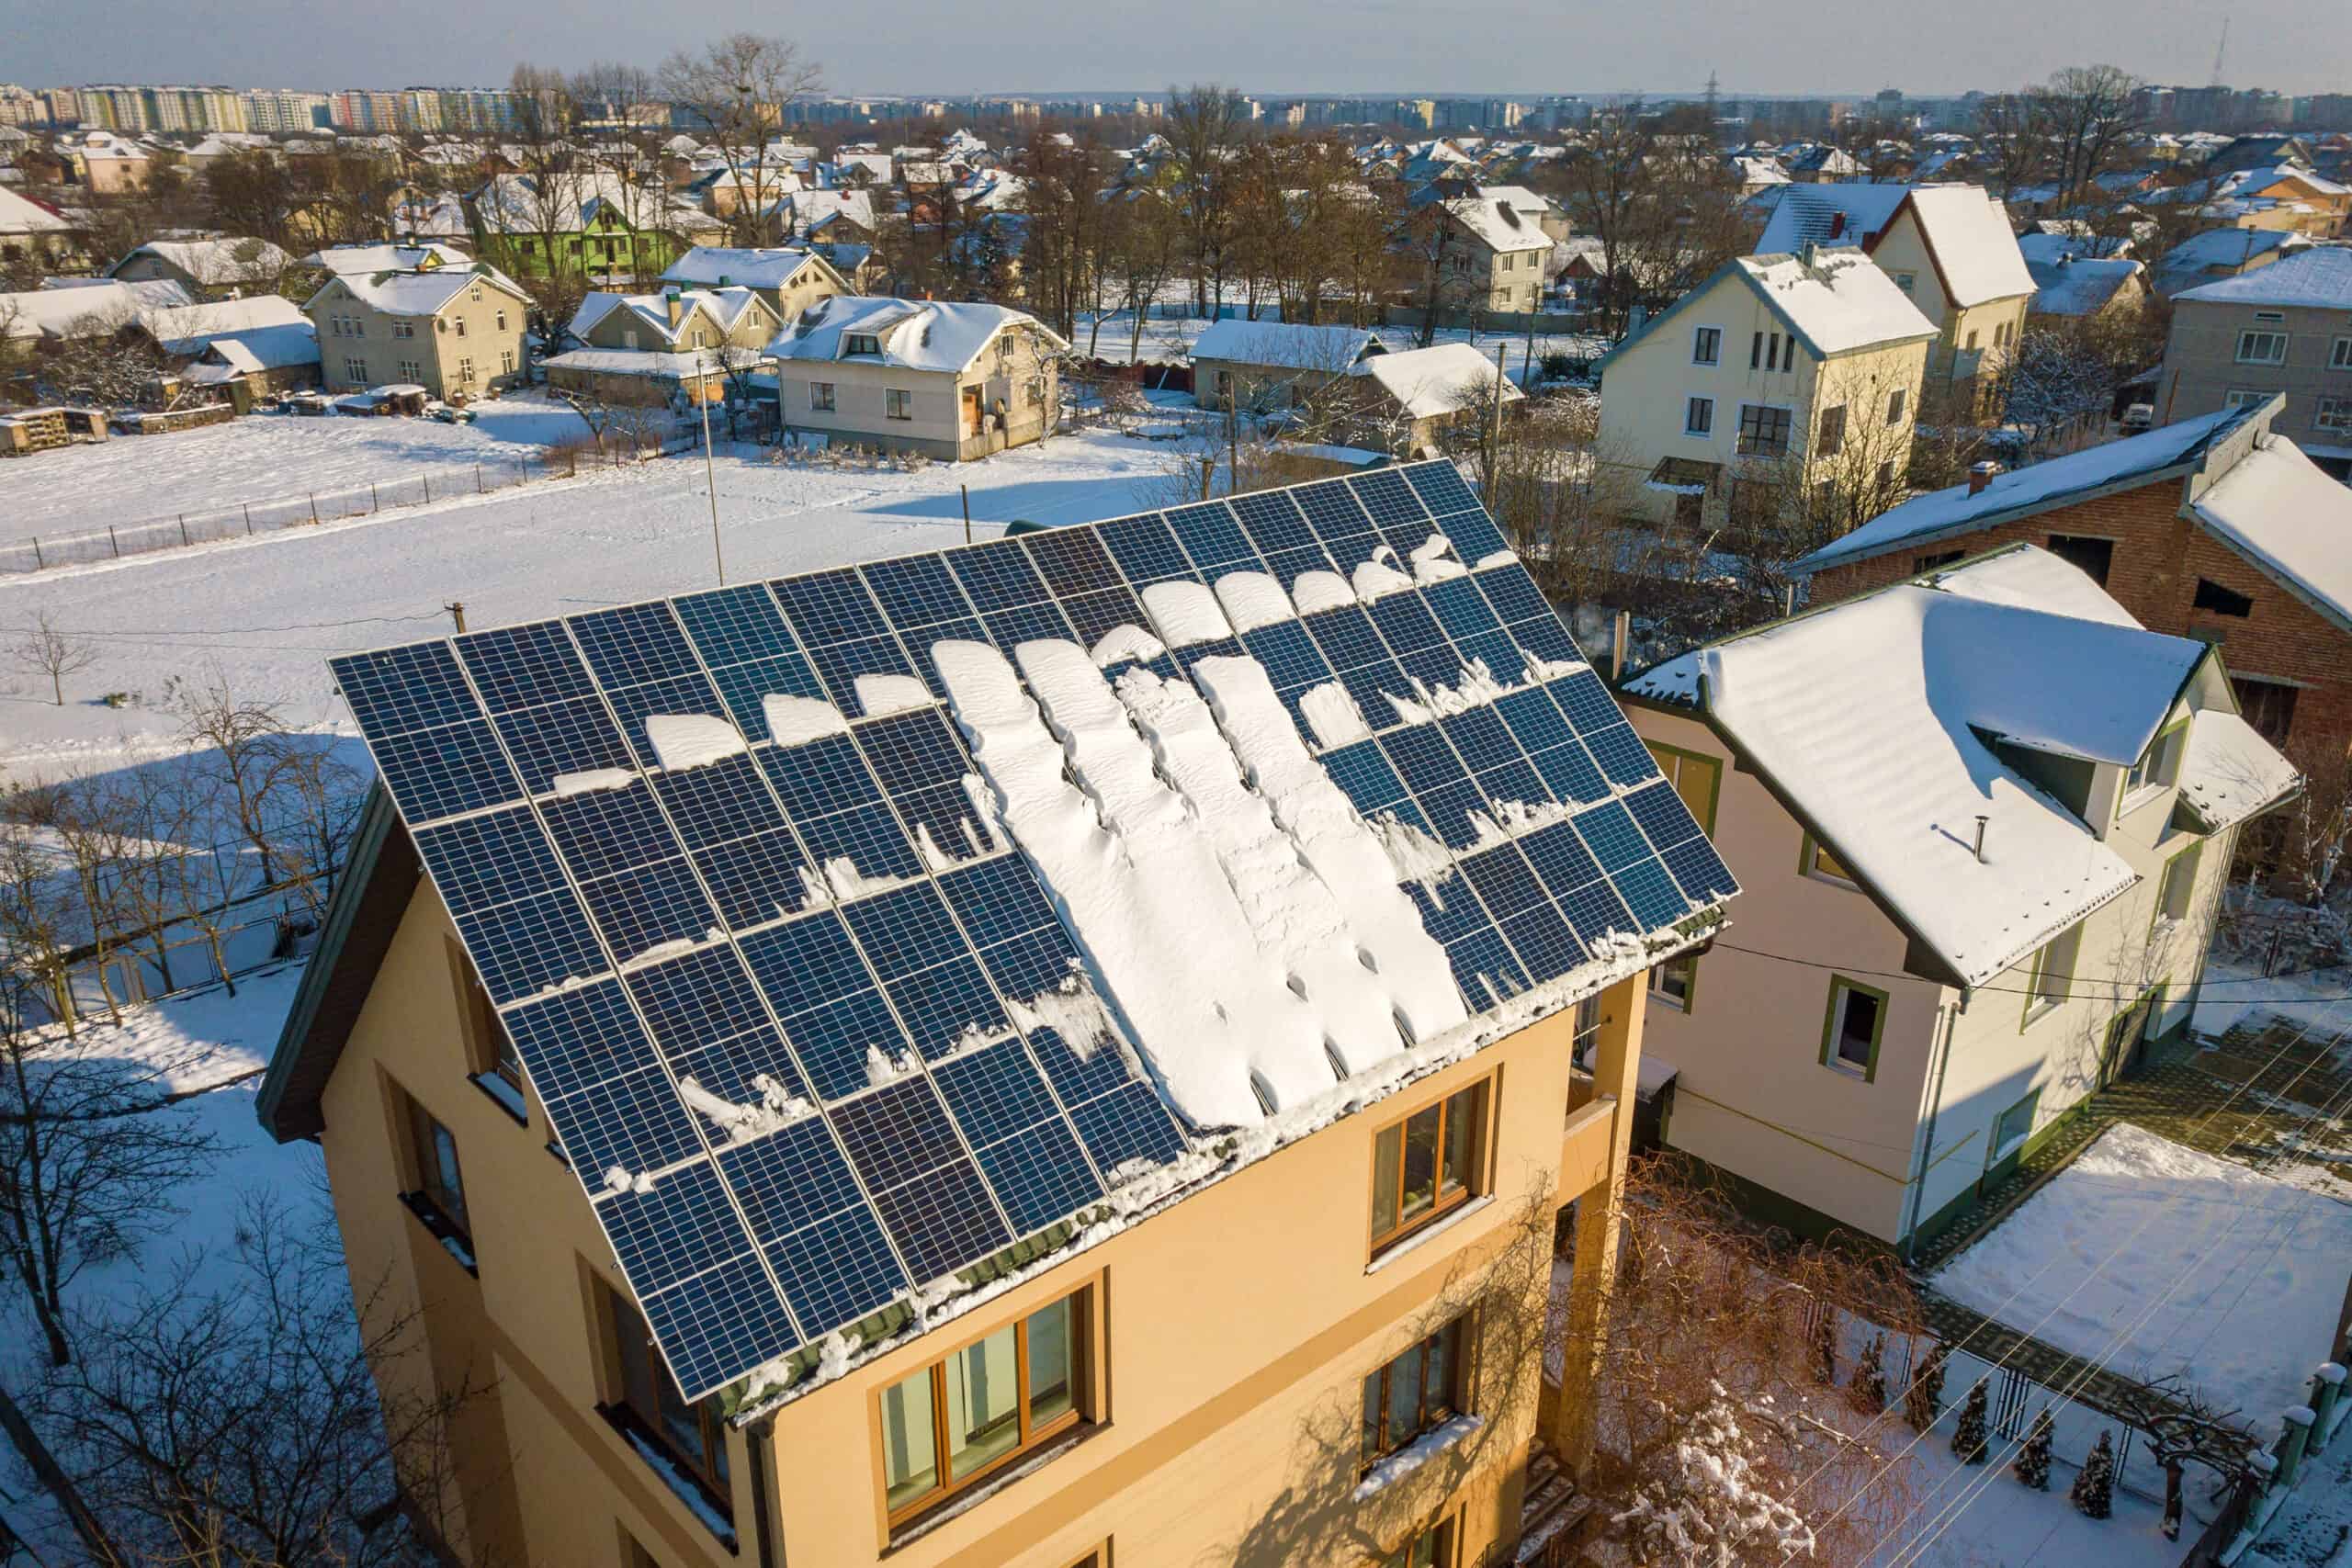 Winter brings snow that can affect solar panel efficiency.